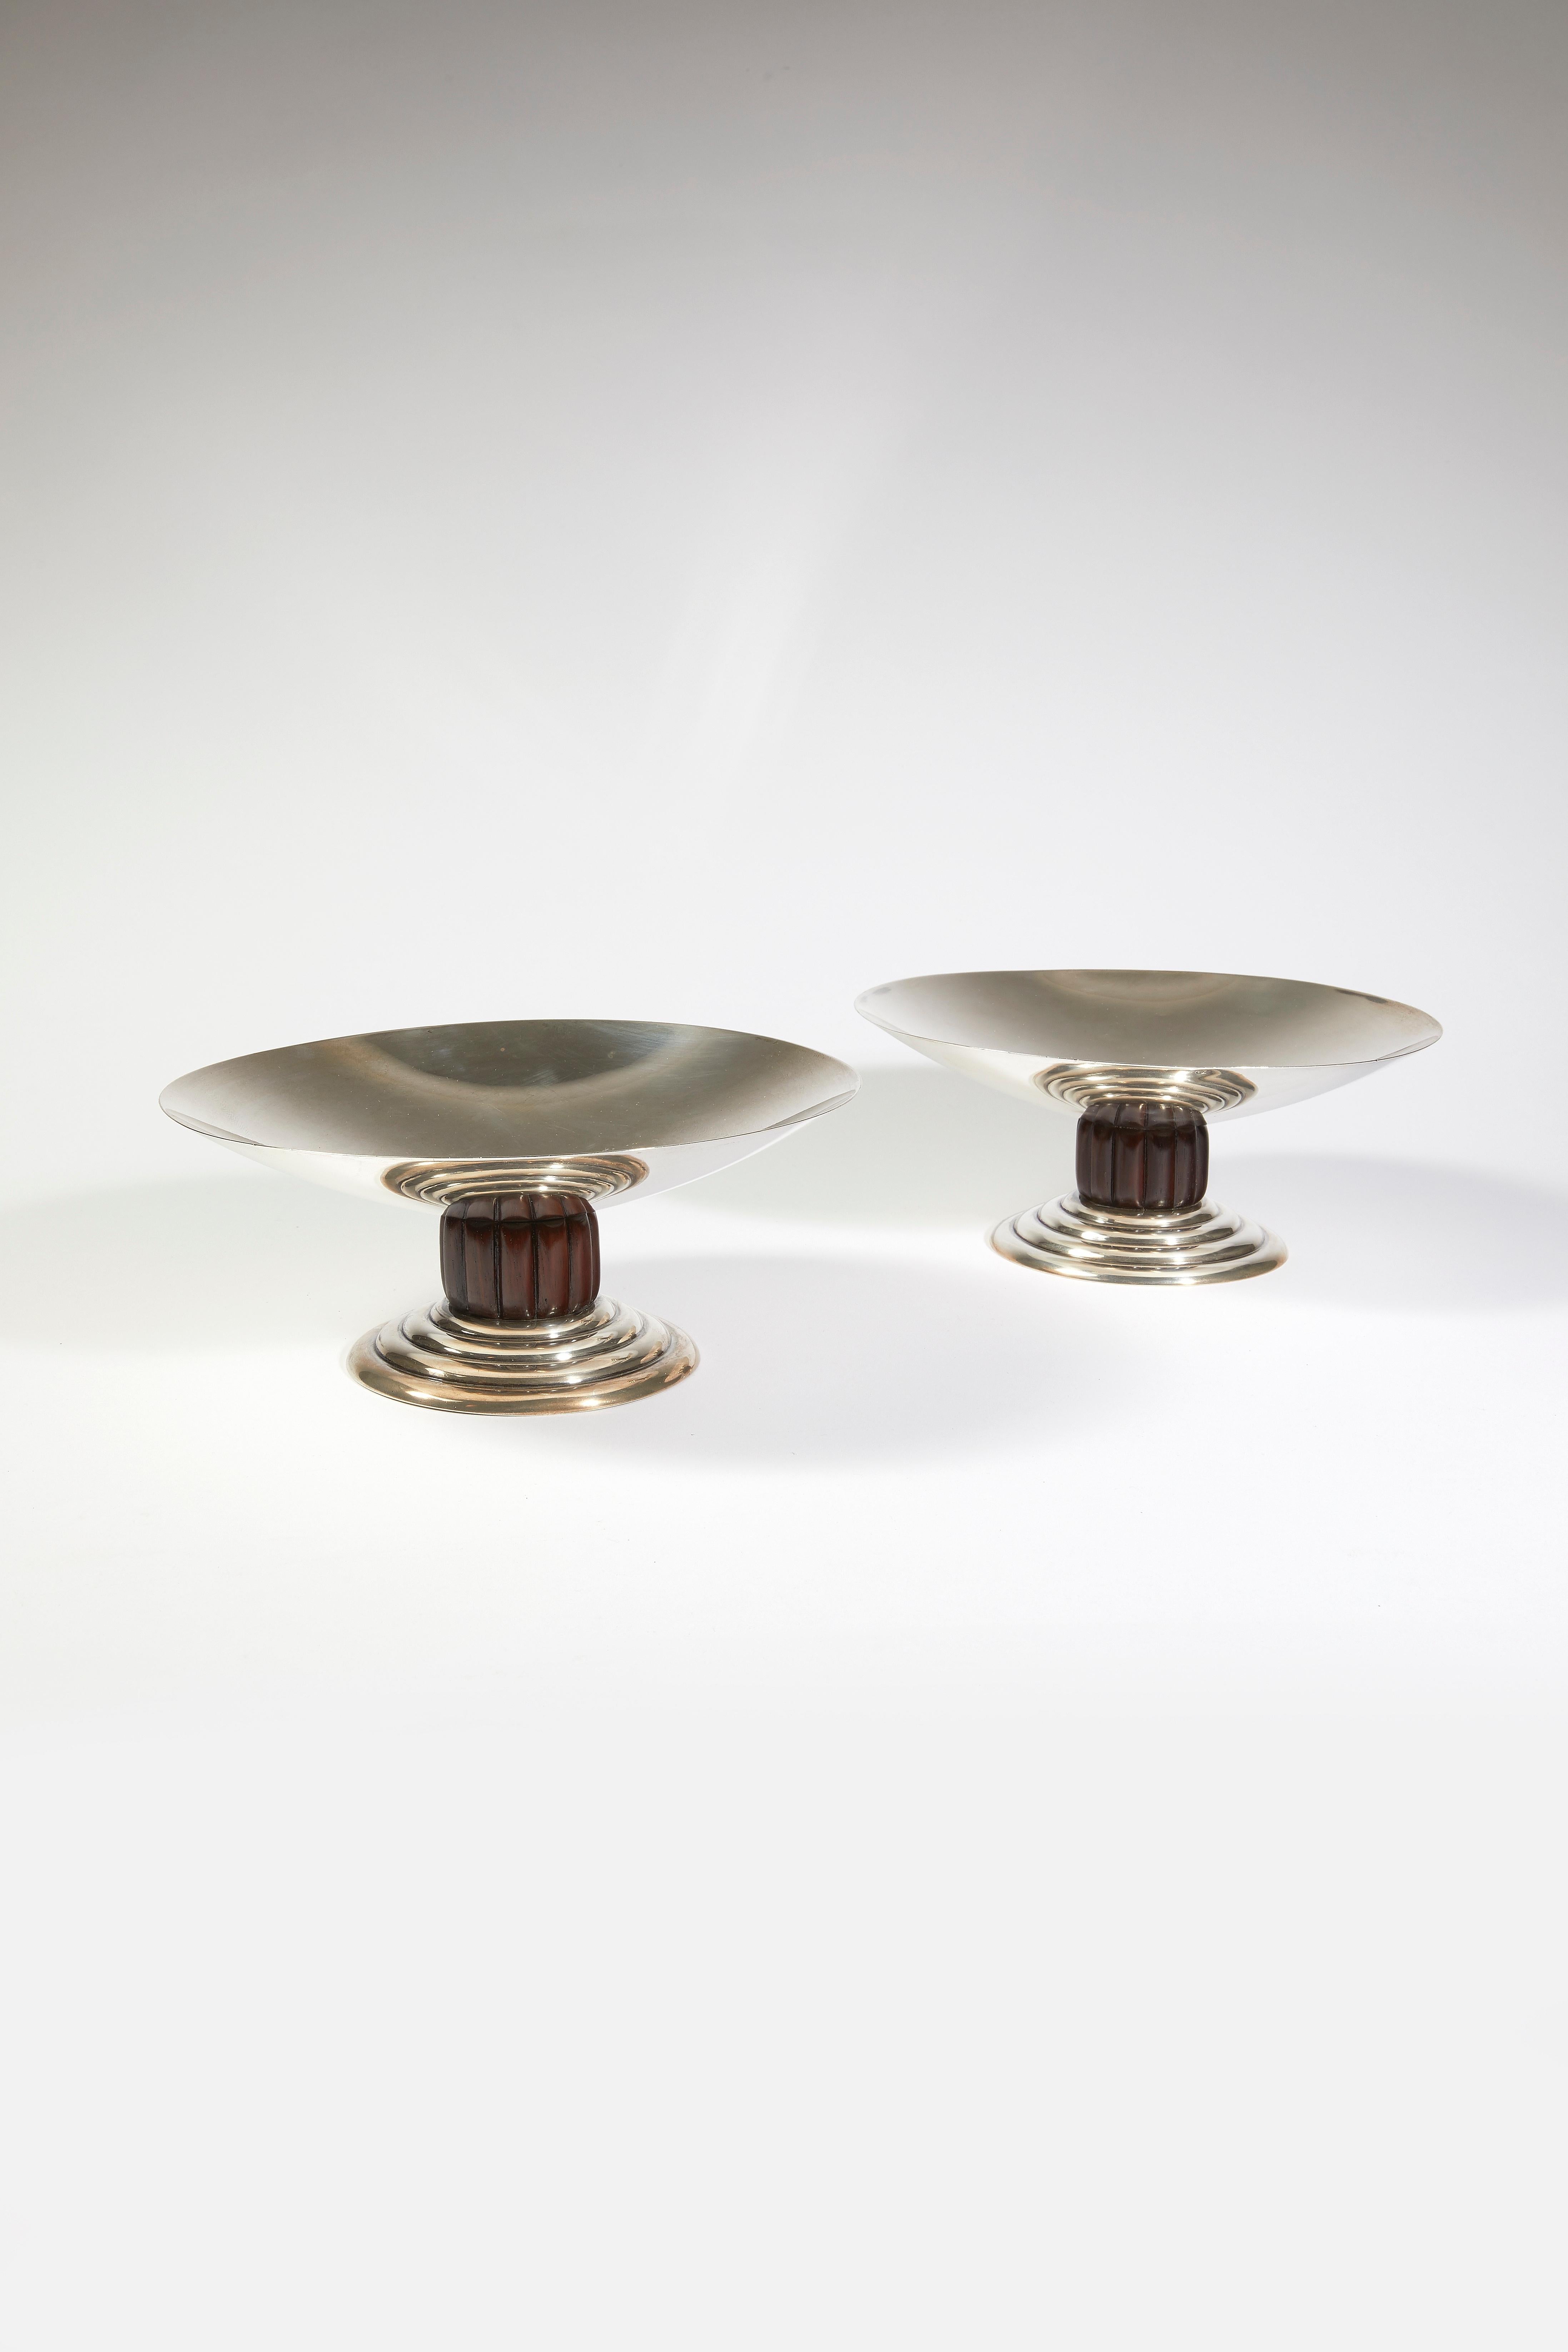 Pair of silver compotiers, circa 1930
Circular flared silver bowl resting on a fluted rosewood shaft and a stepped base.
Measures: H 8, L 20 cm (H 3.1-W 7.9 in).